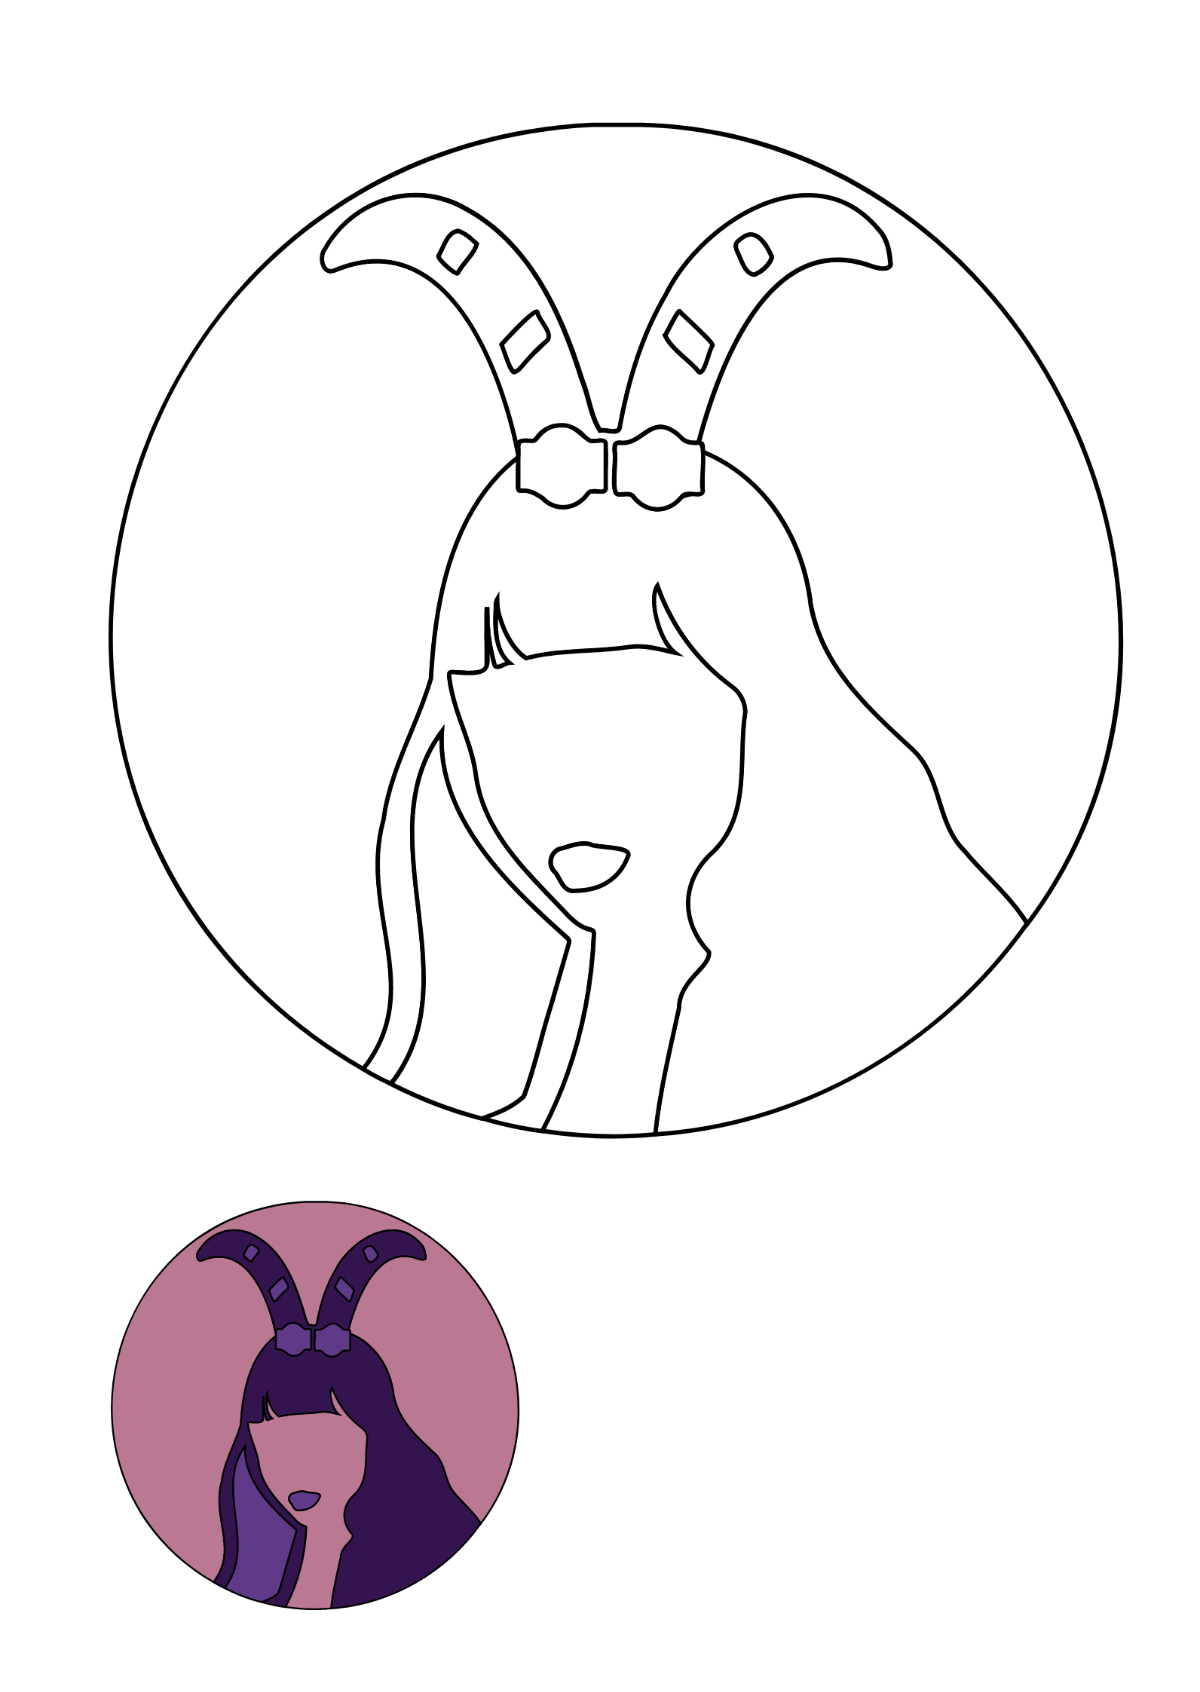 Capricorn Woman coloring page Template